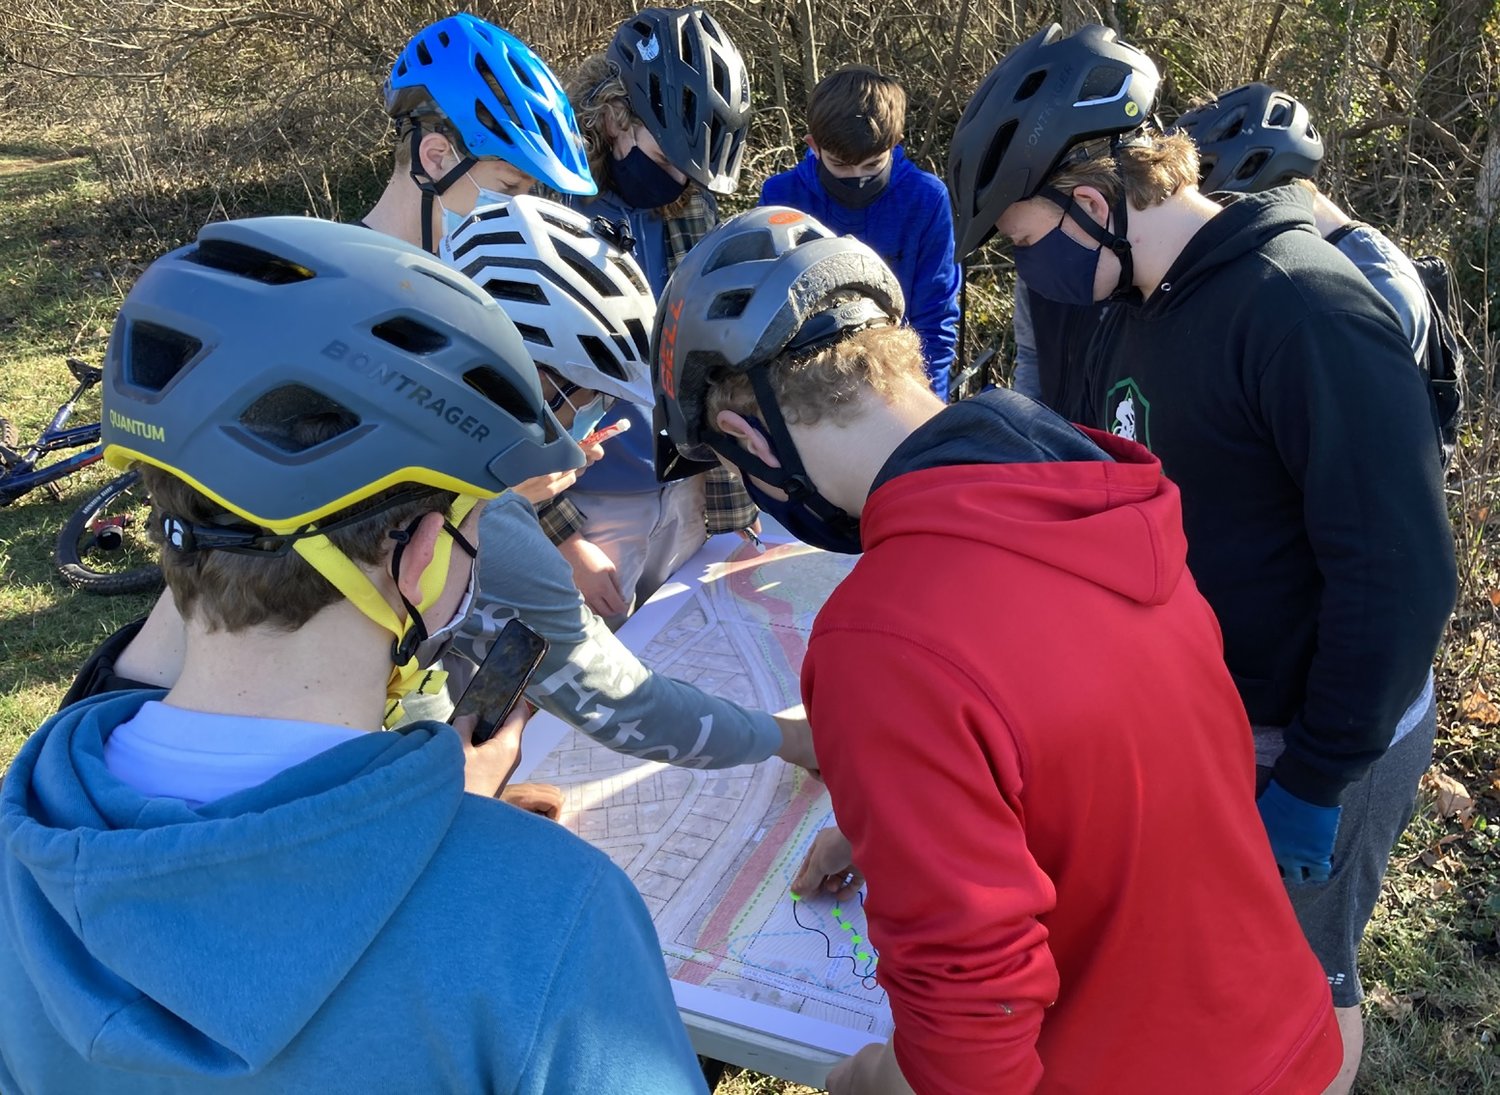 Teen residents near the Lone Pine Bike Park provide input during a public mapping discussion.